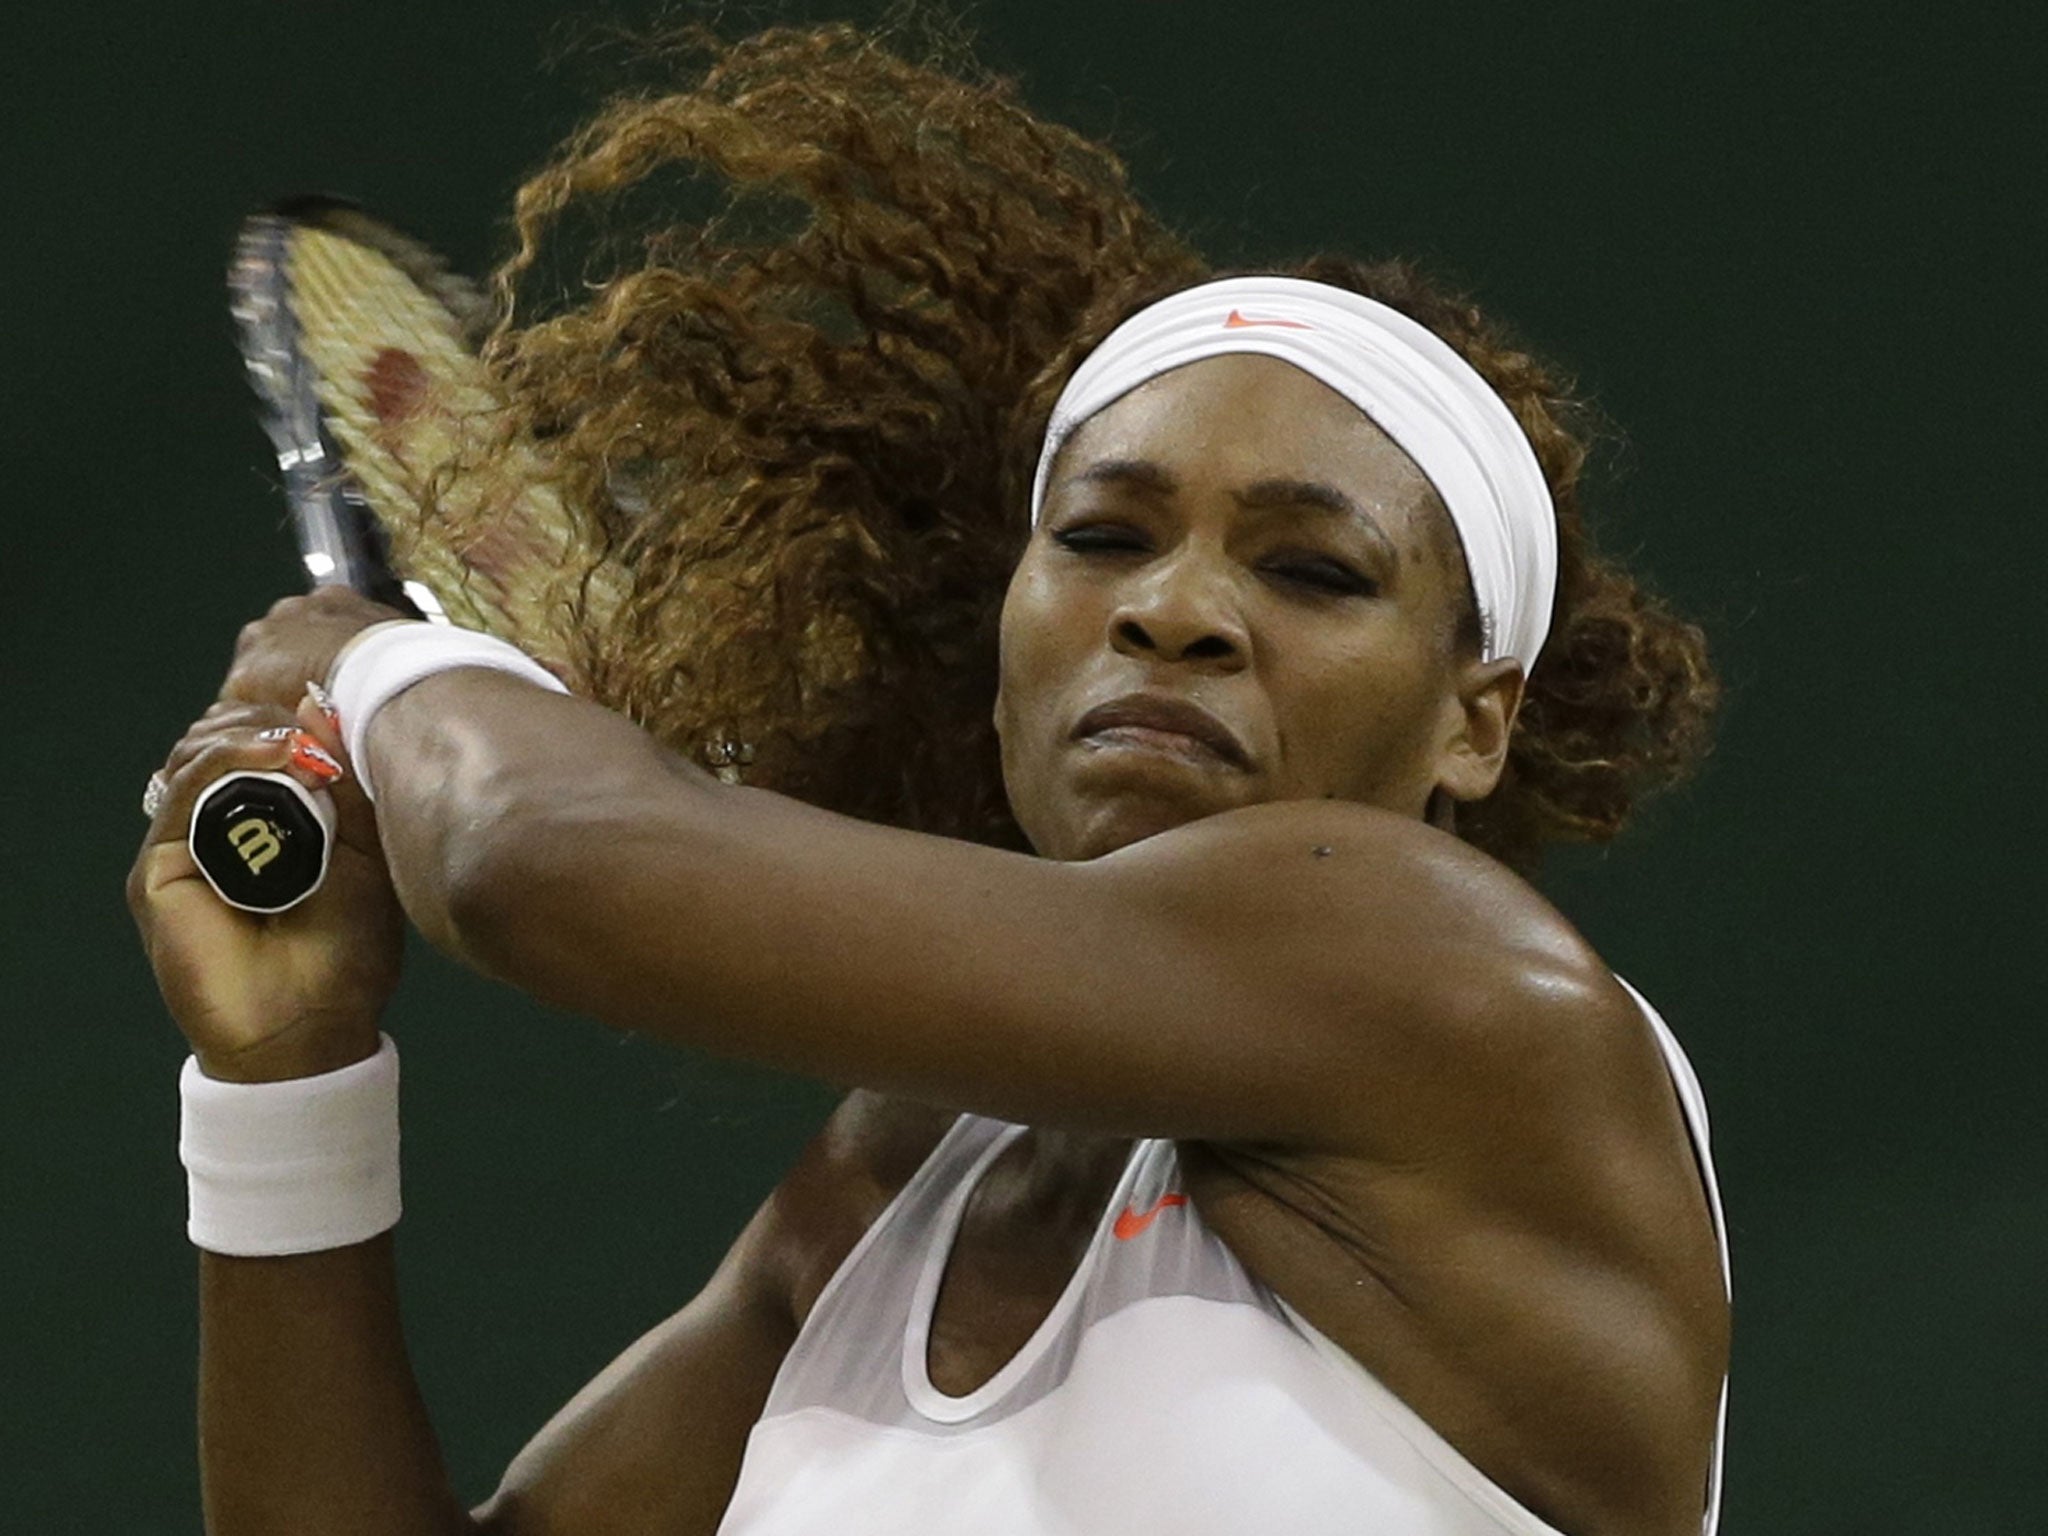 Late show: Serena Williams’ match was moved to Centre Court well after 8pm